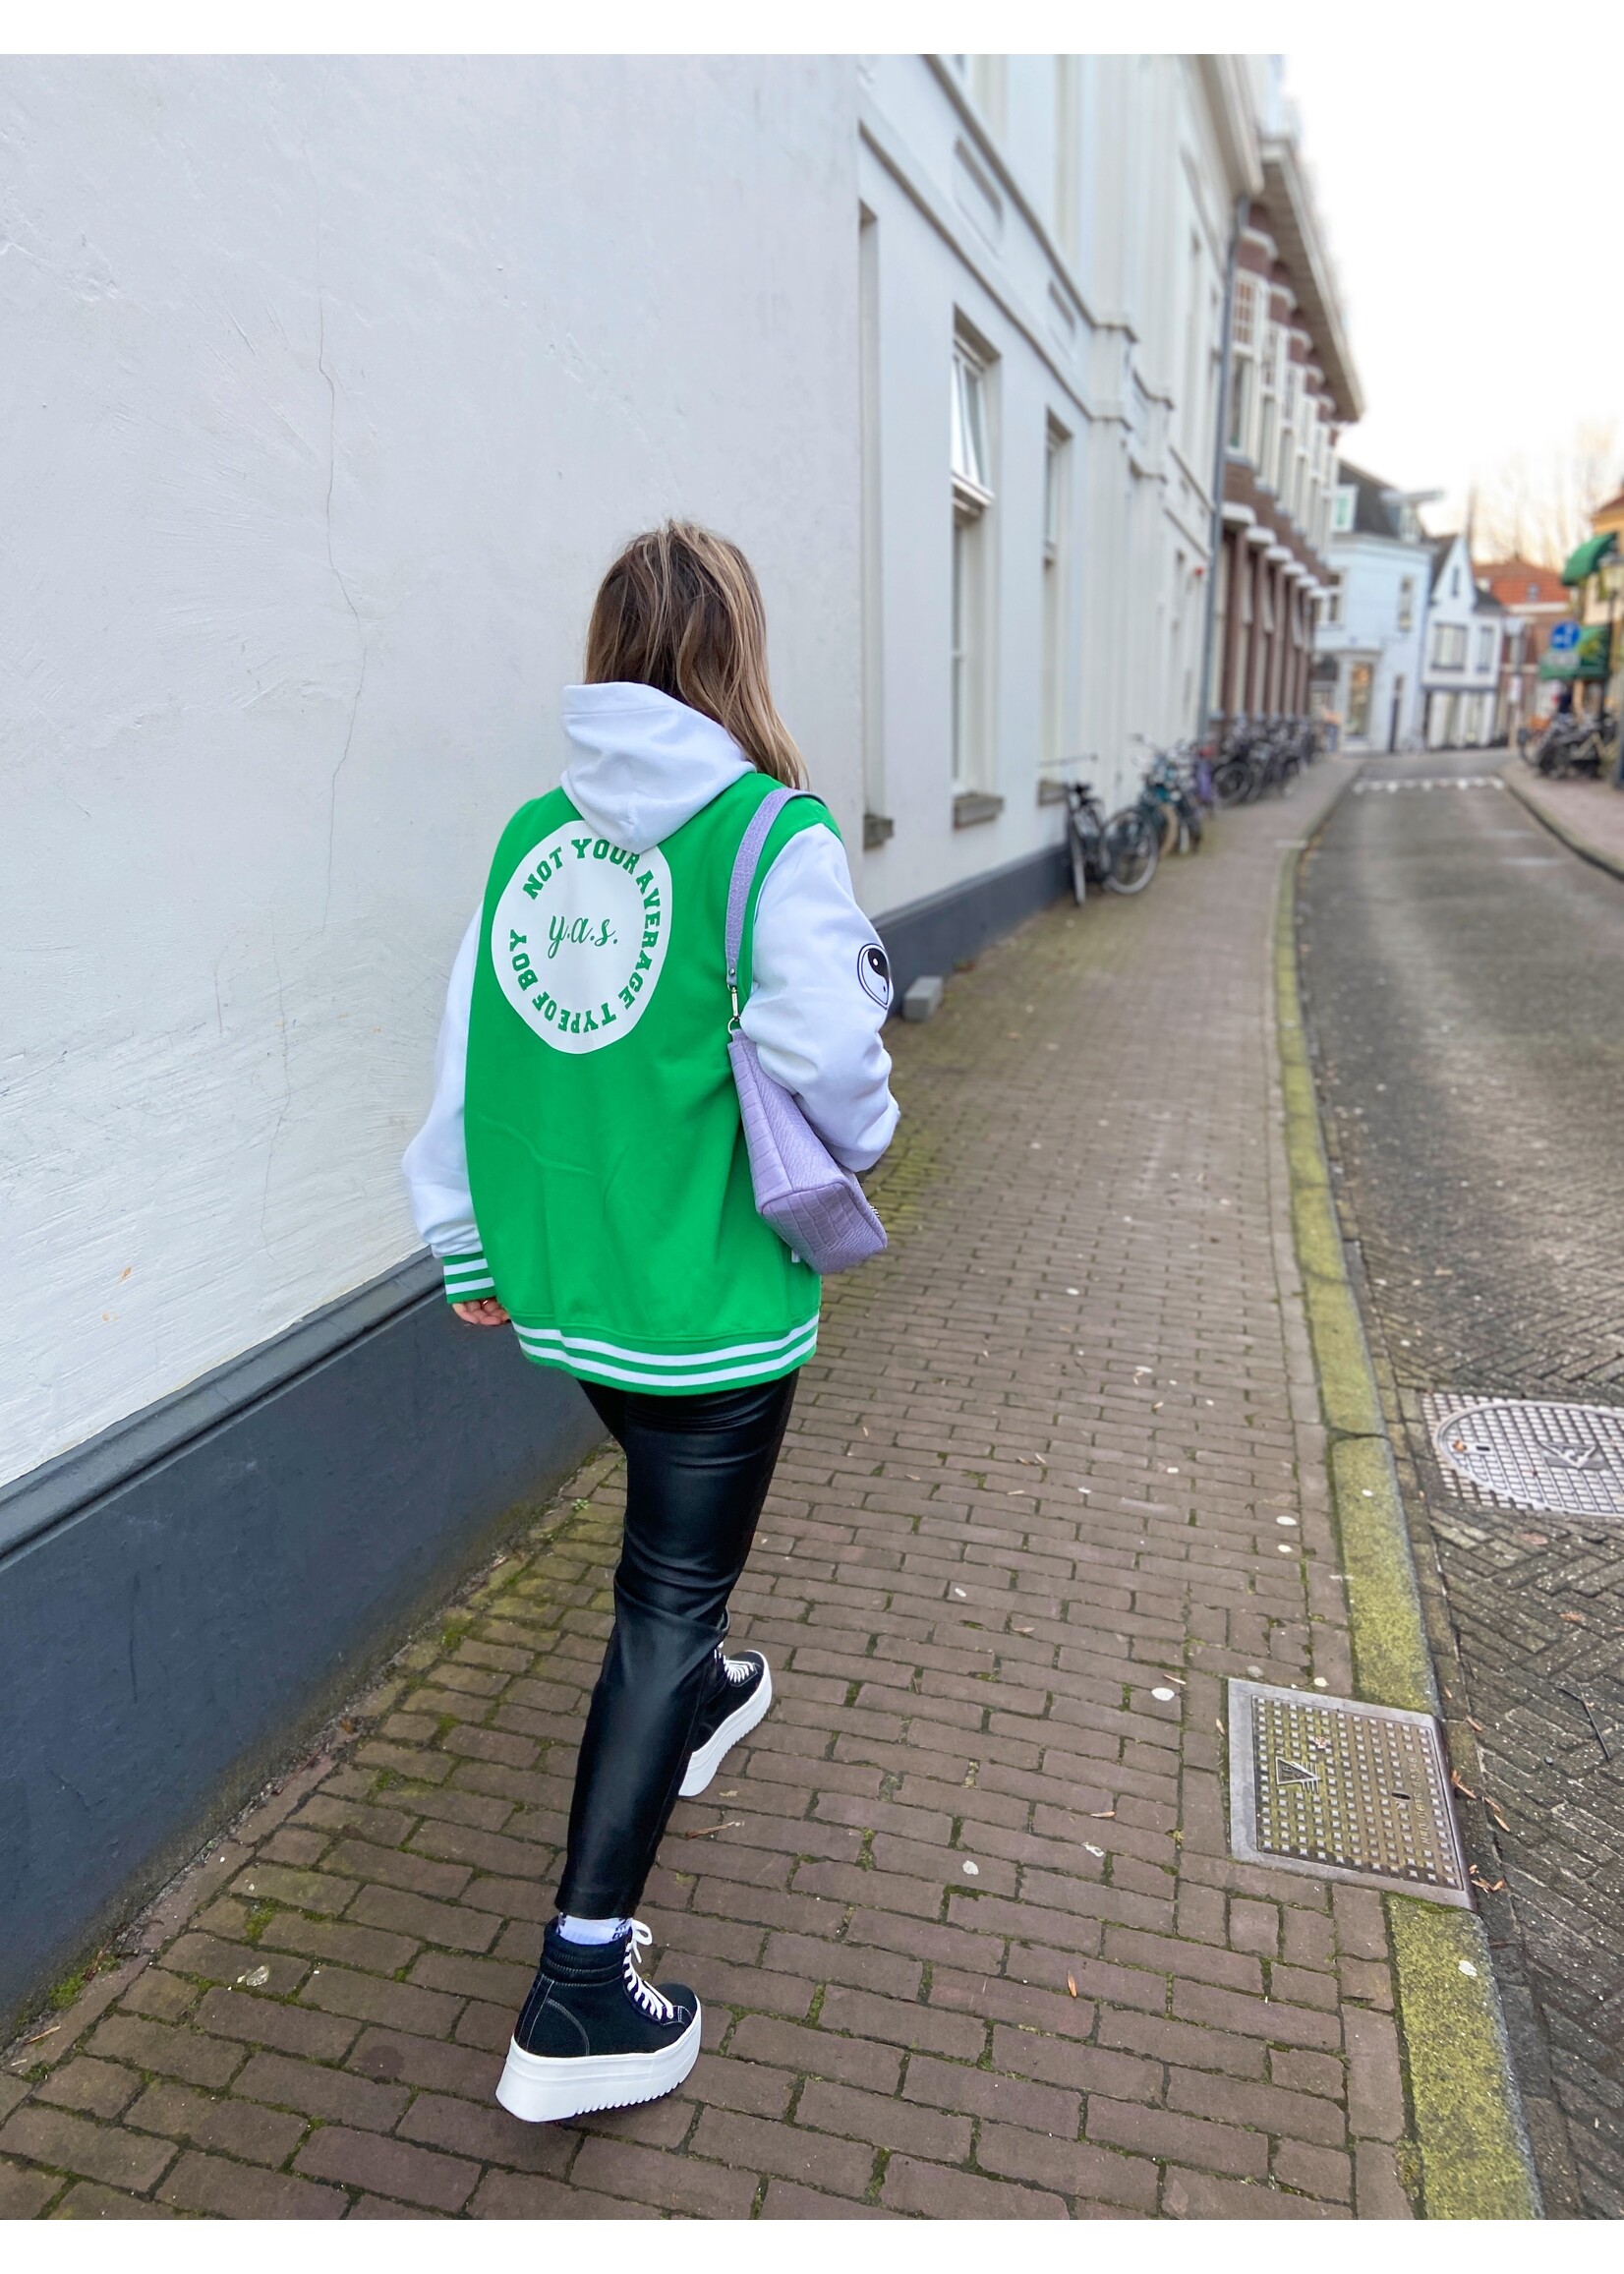 YOU ARE SPECIAL "Not Your Average Type Of Boy" UNISEX Green Baseball Jacket (one of a kind)